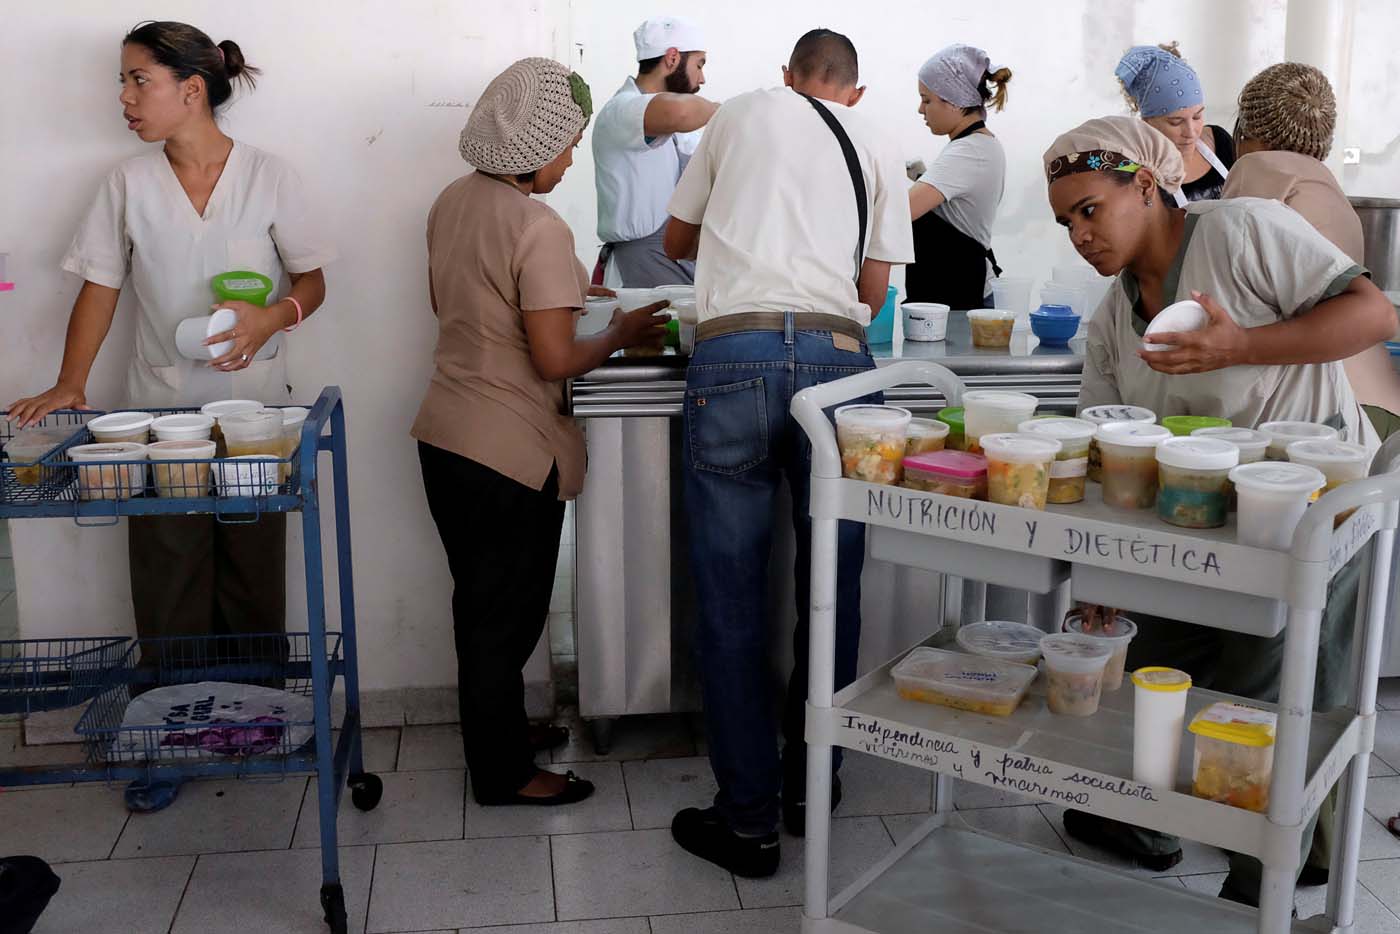 Waitresses of the J.M. de los Rios Children Hospital wait for cups of soup donated by La Casa Bistro restaurant, member of the "Full Stomach, Happy Heart" (Barriga llena, corazon contento) charity, to distribute them at hospitalization floors, in Caracas, Venezuela February 20, 2017. Picture taken February 20, 2017. REUTERS/Marco Bello